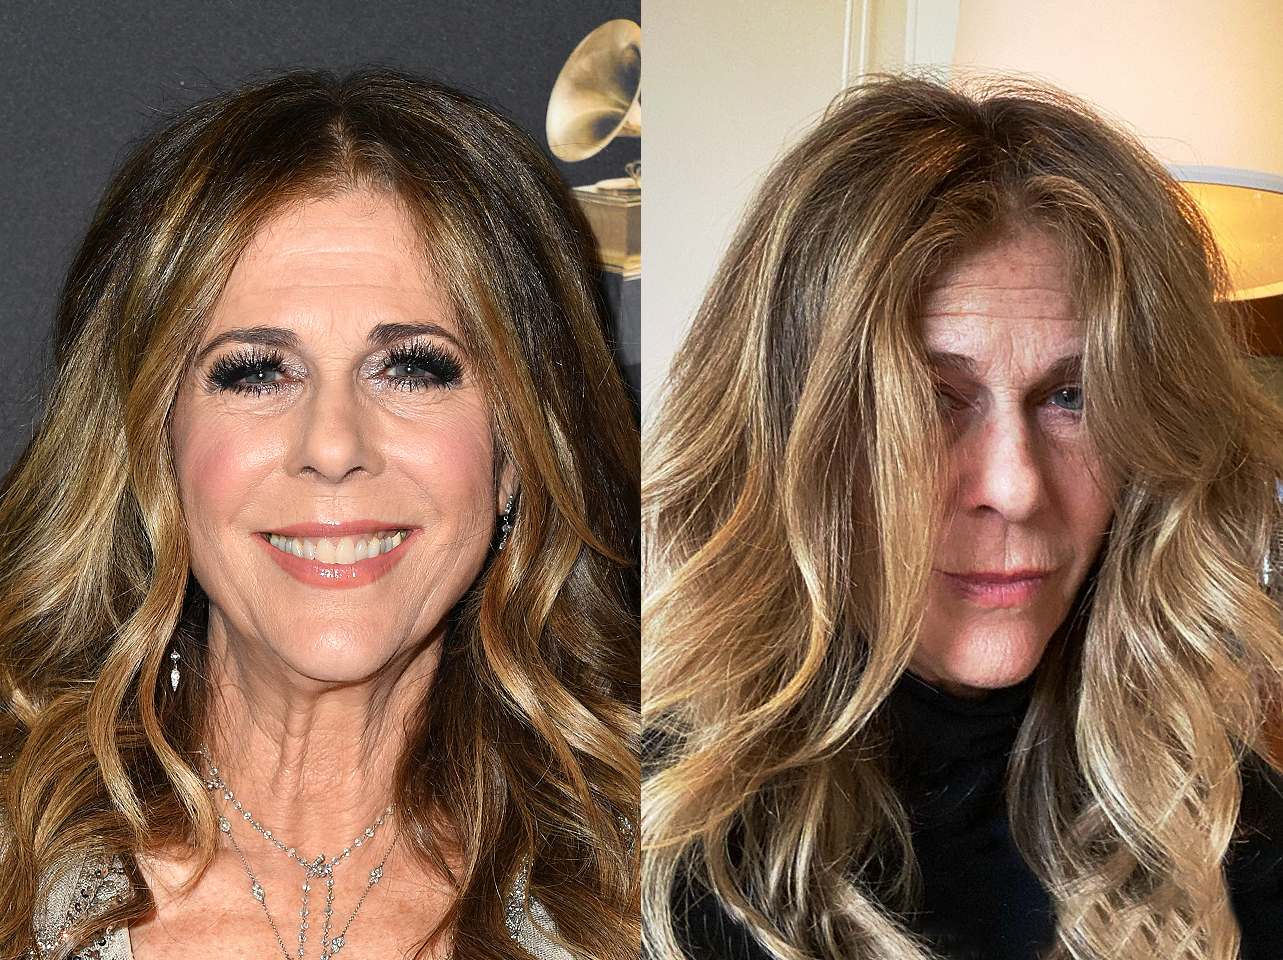 Rita Wilson with makeup vs without makeup | Source: Getty Images | Instagram/ritawilson